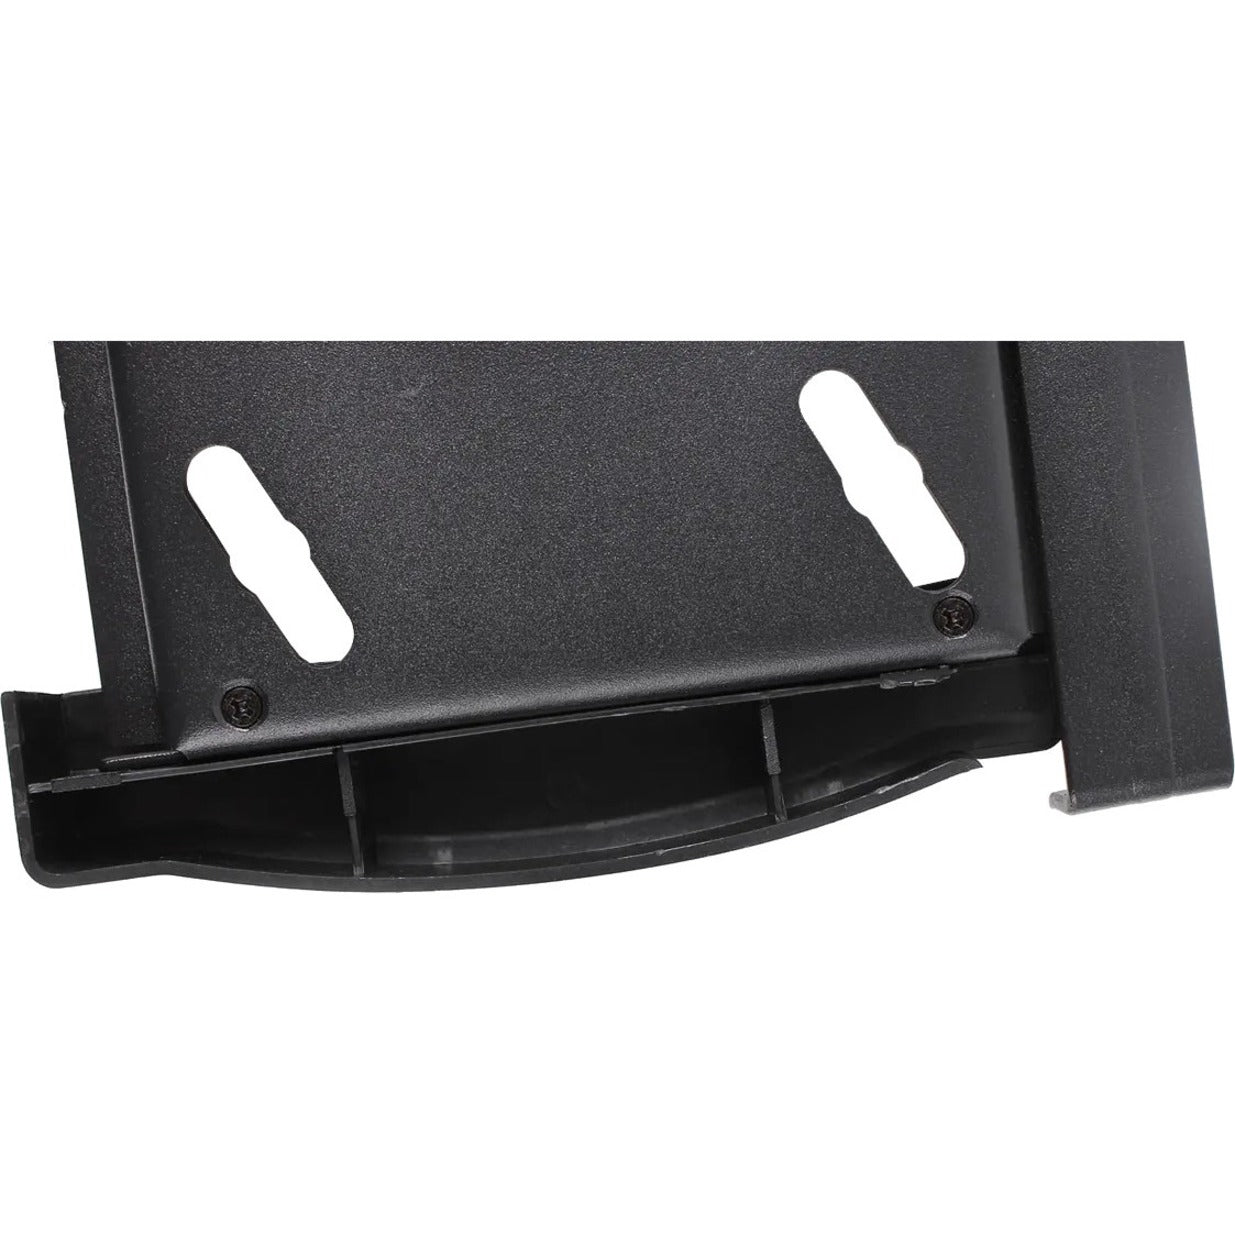 Monoprice 10473 Commercial Mounting Bracket for 32-55 inch TVs, Max 99 lbs., UL Certified